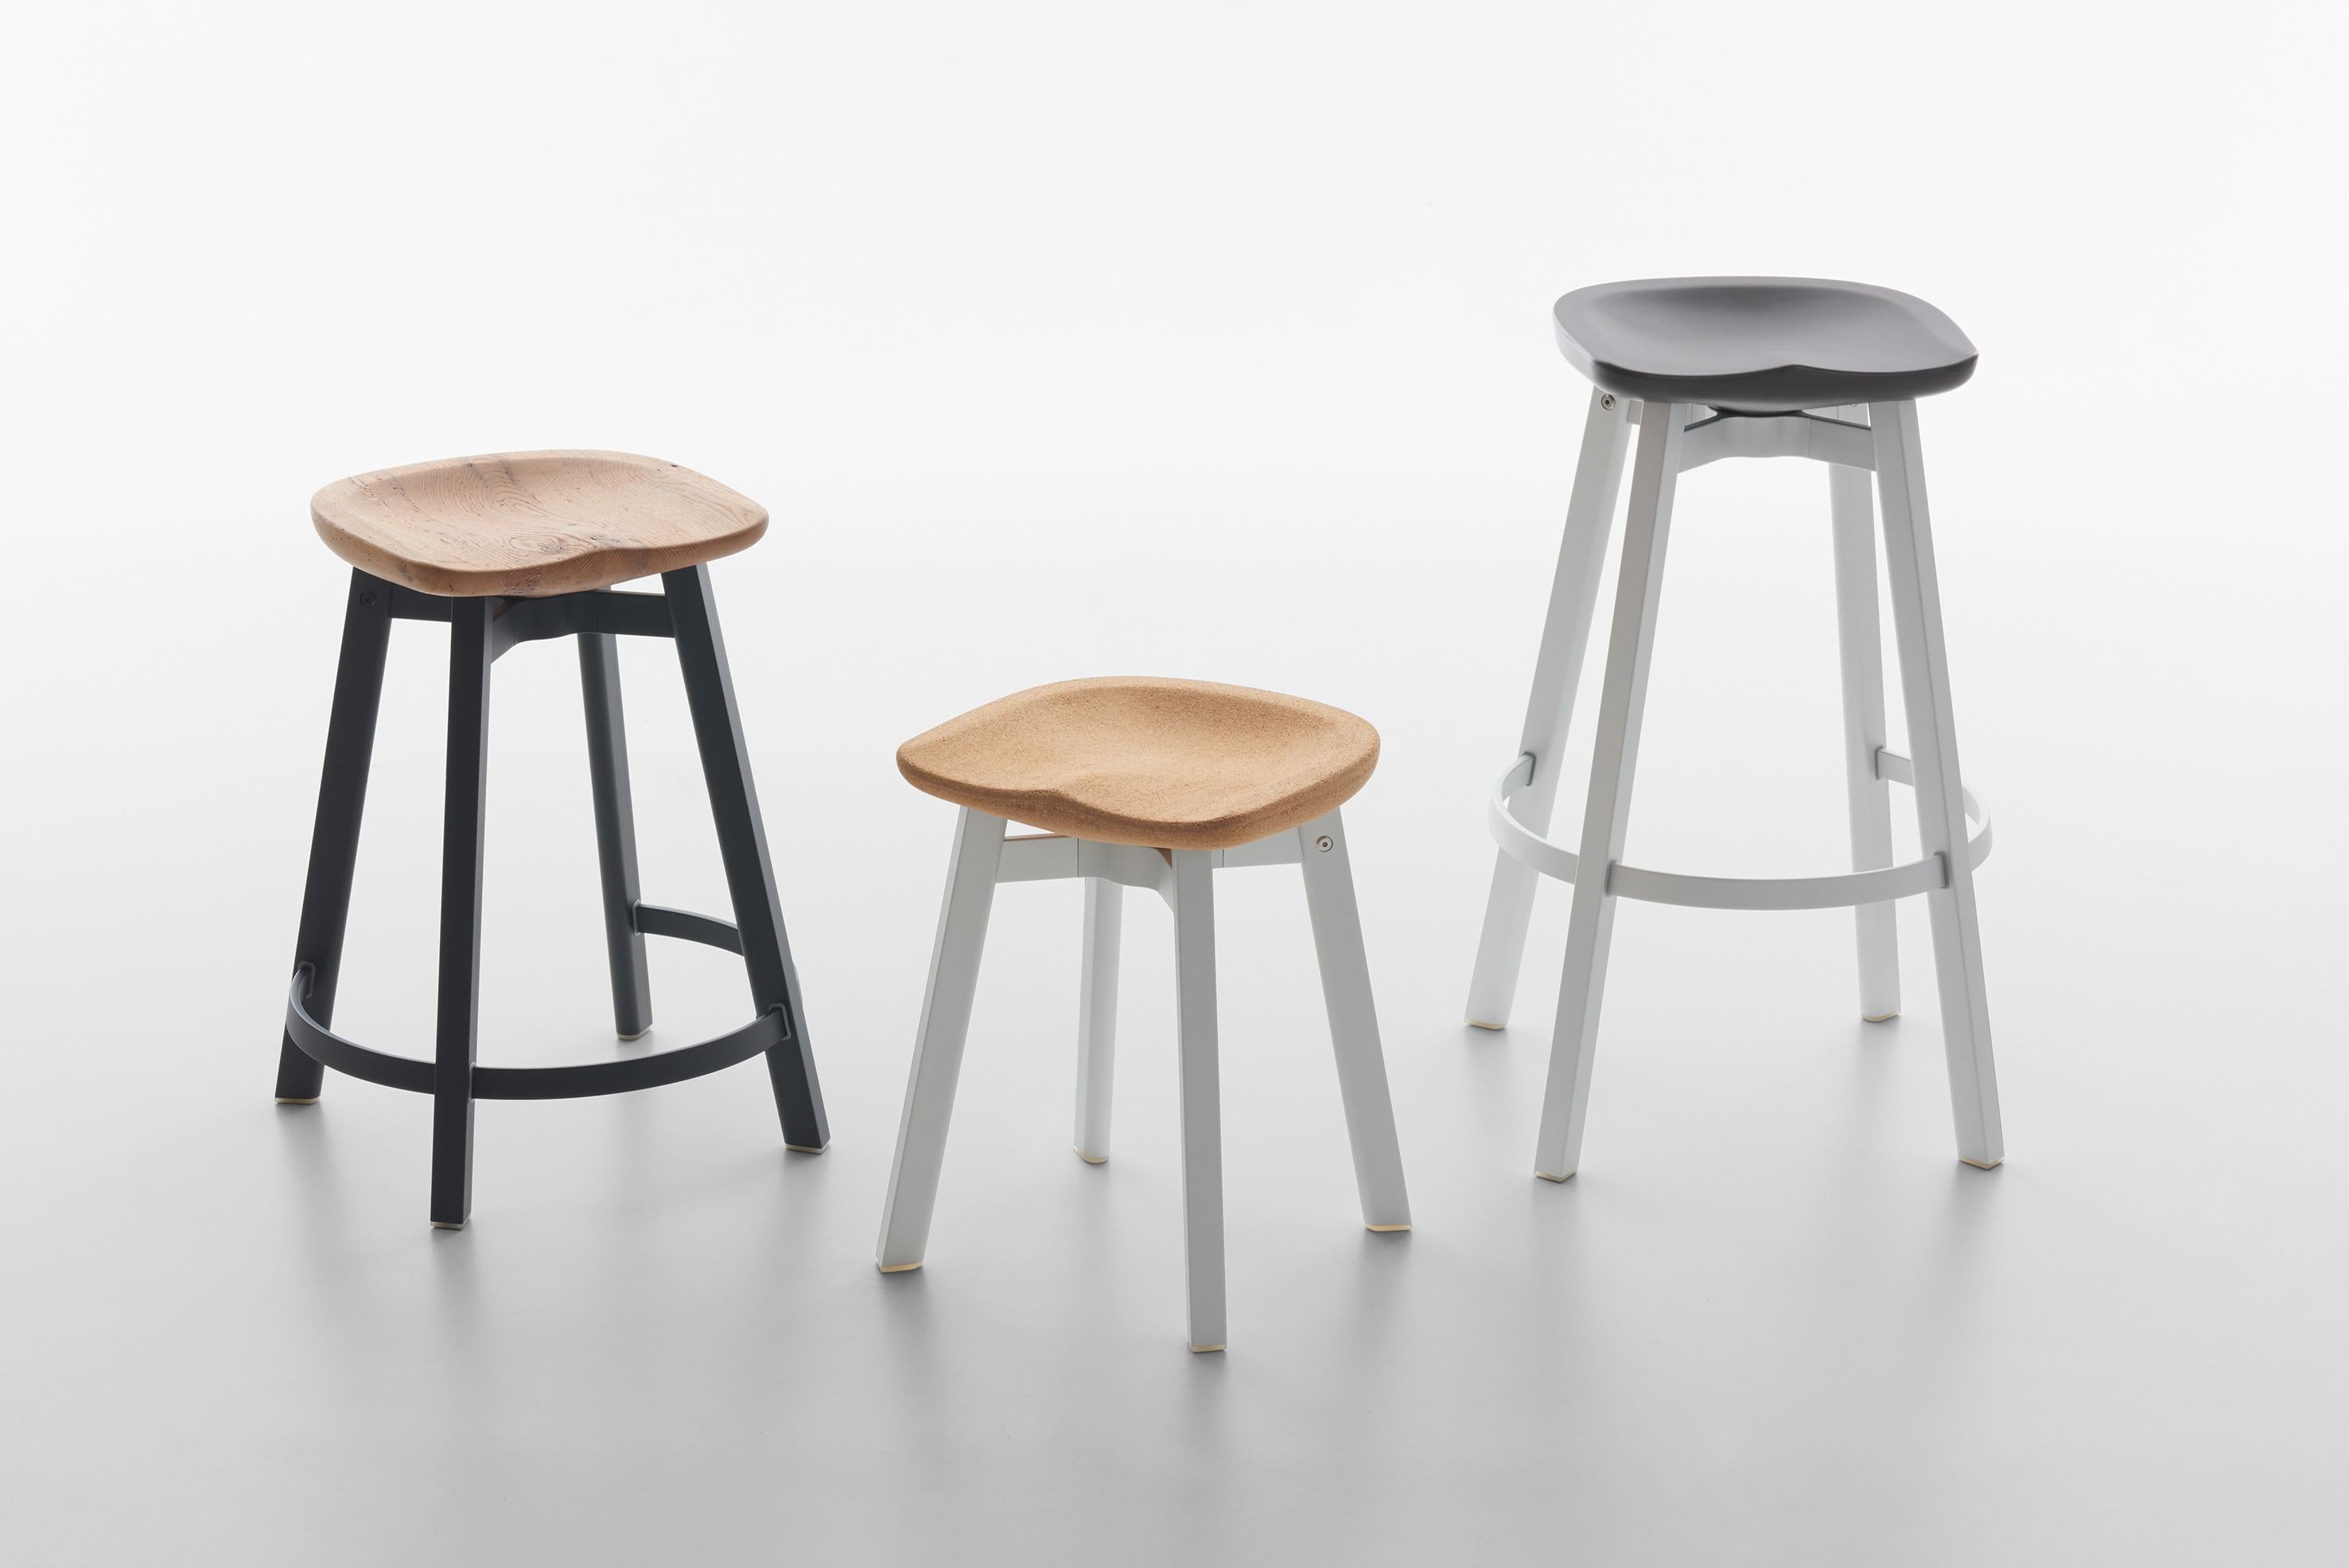 Modern Emeco Su Small Stool in Natural Aluminum with Flint Seat by Nendo